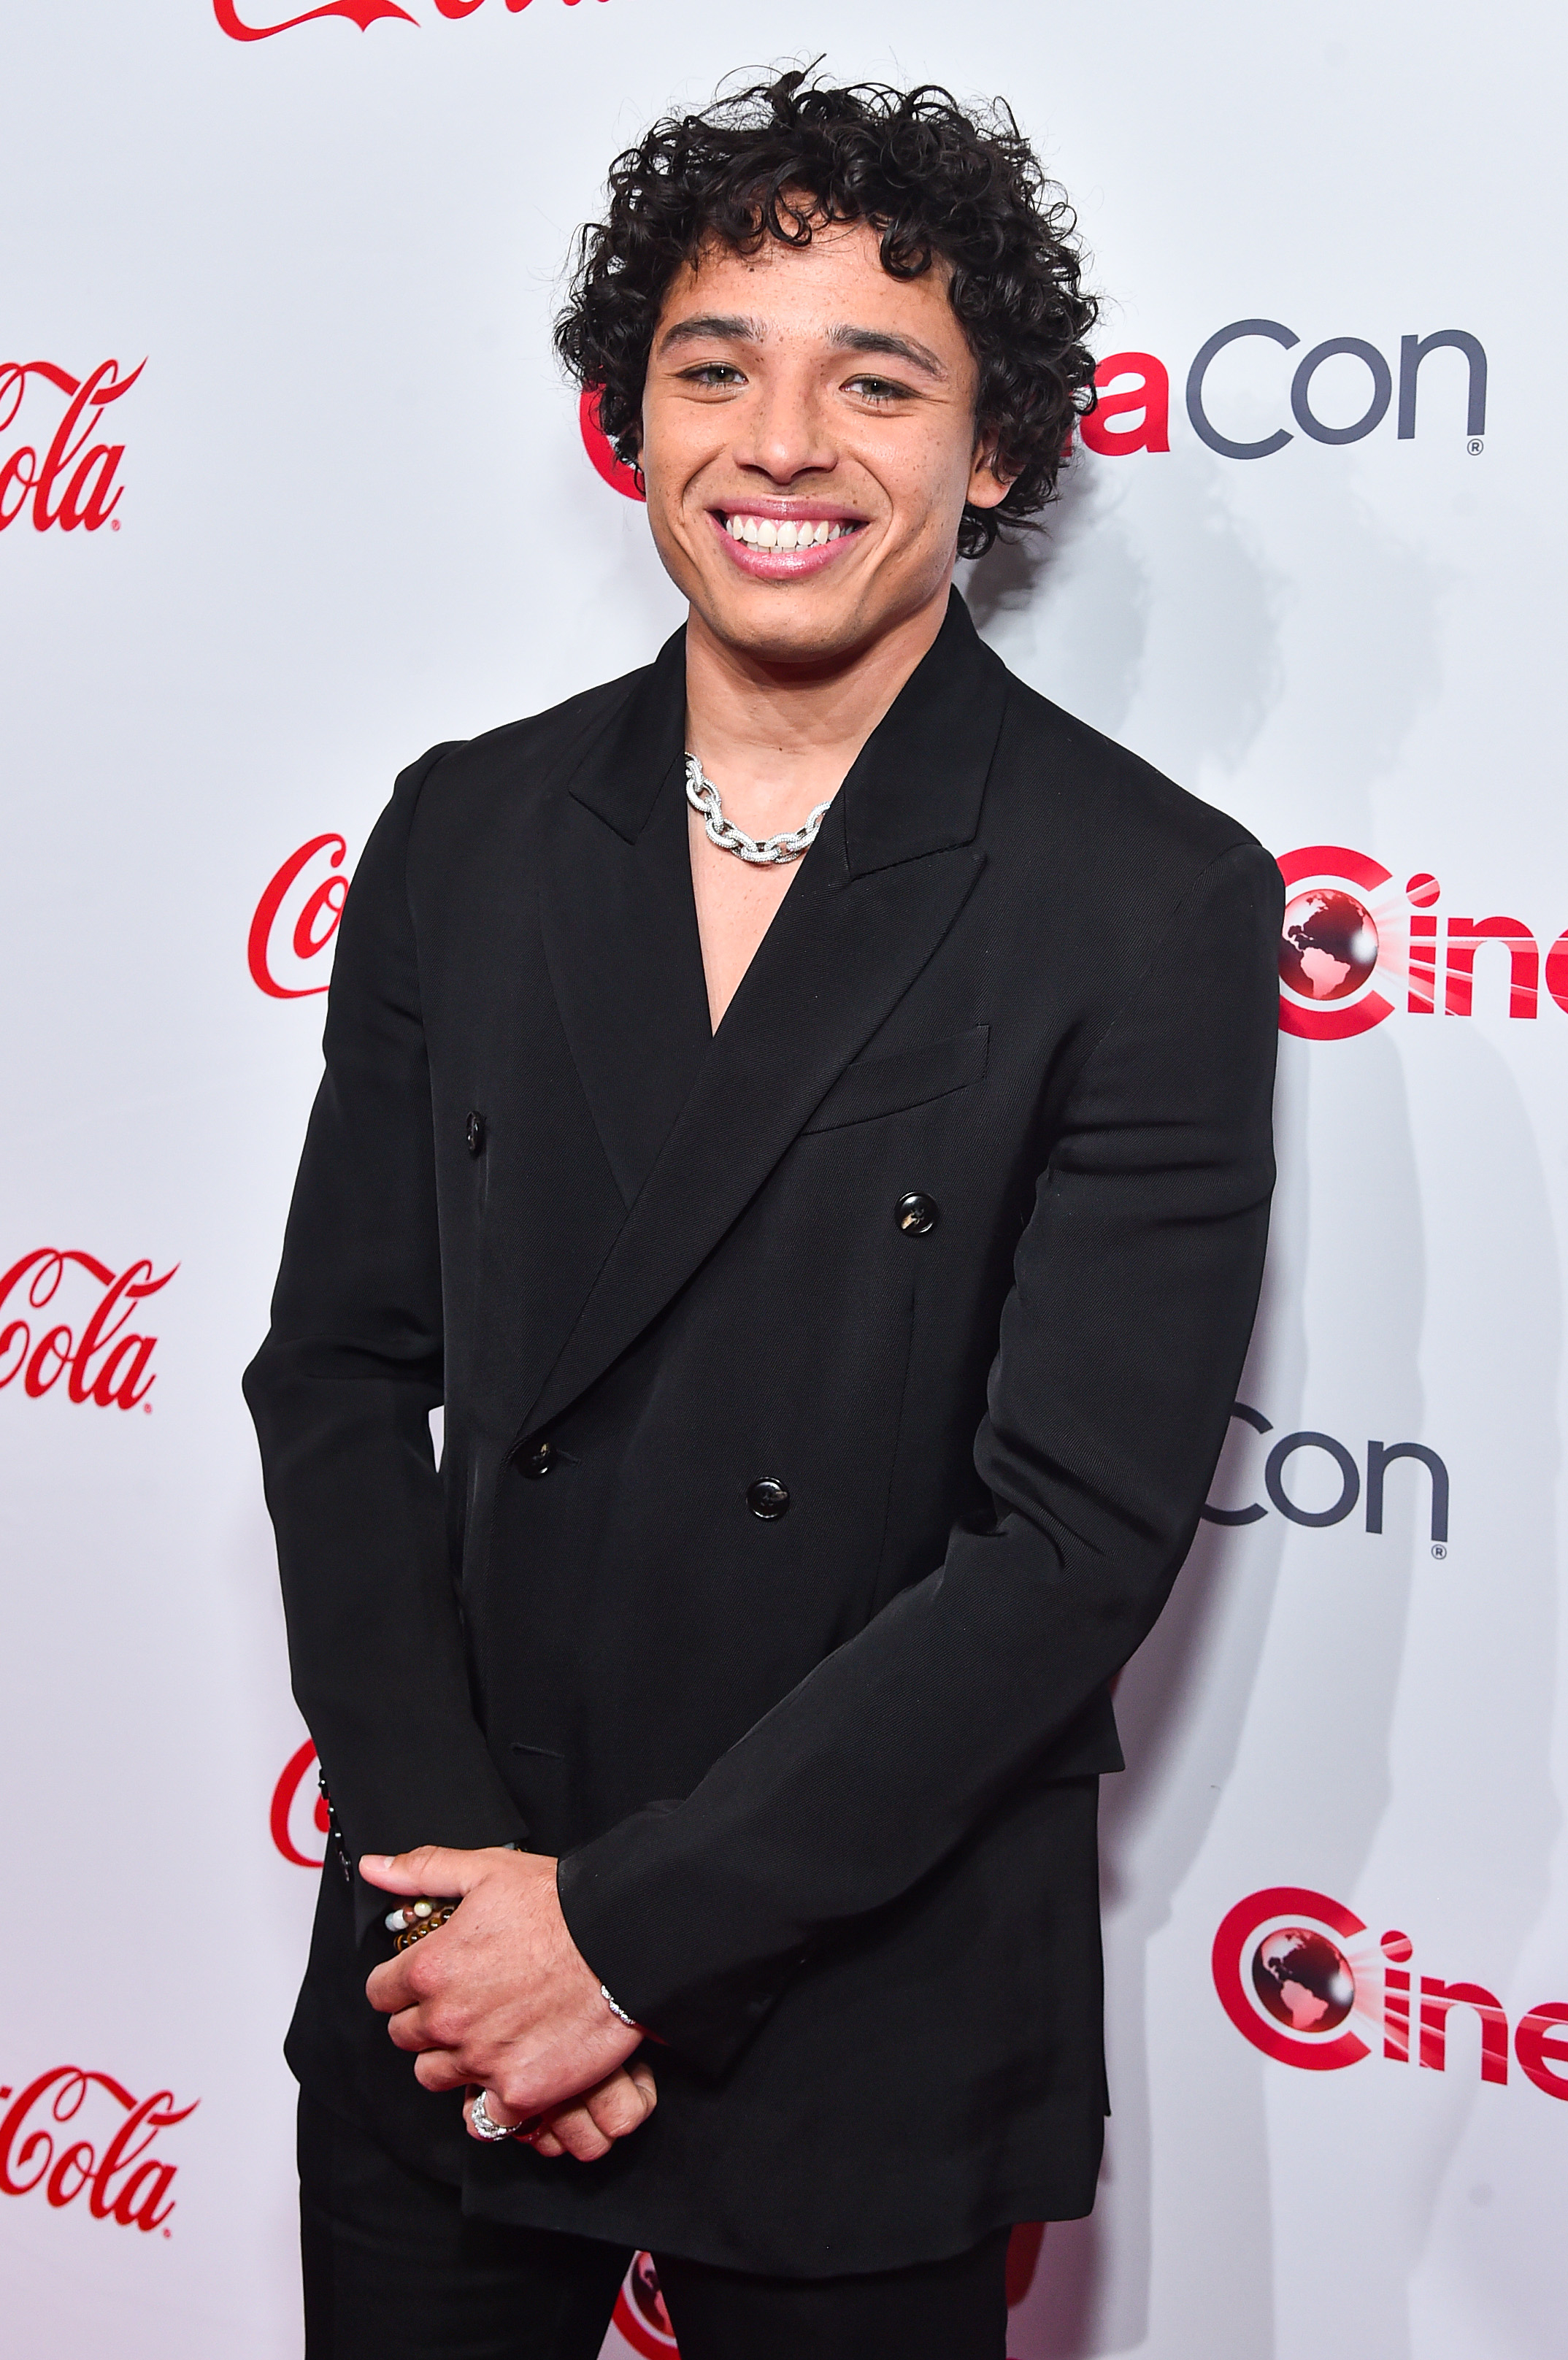 Close-up of Anthony smiling at a media event in a suit